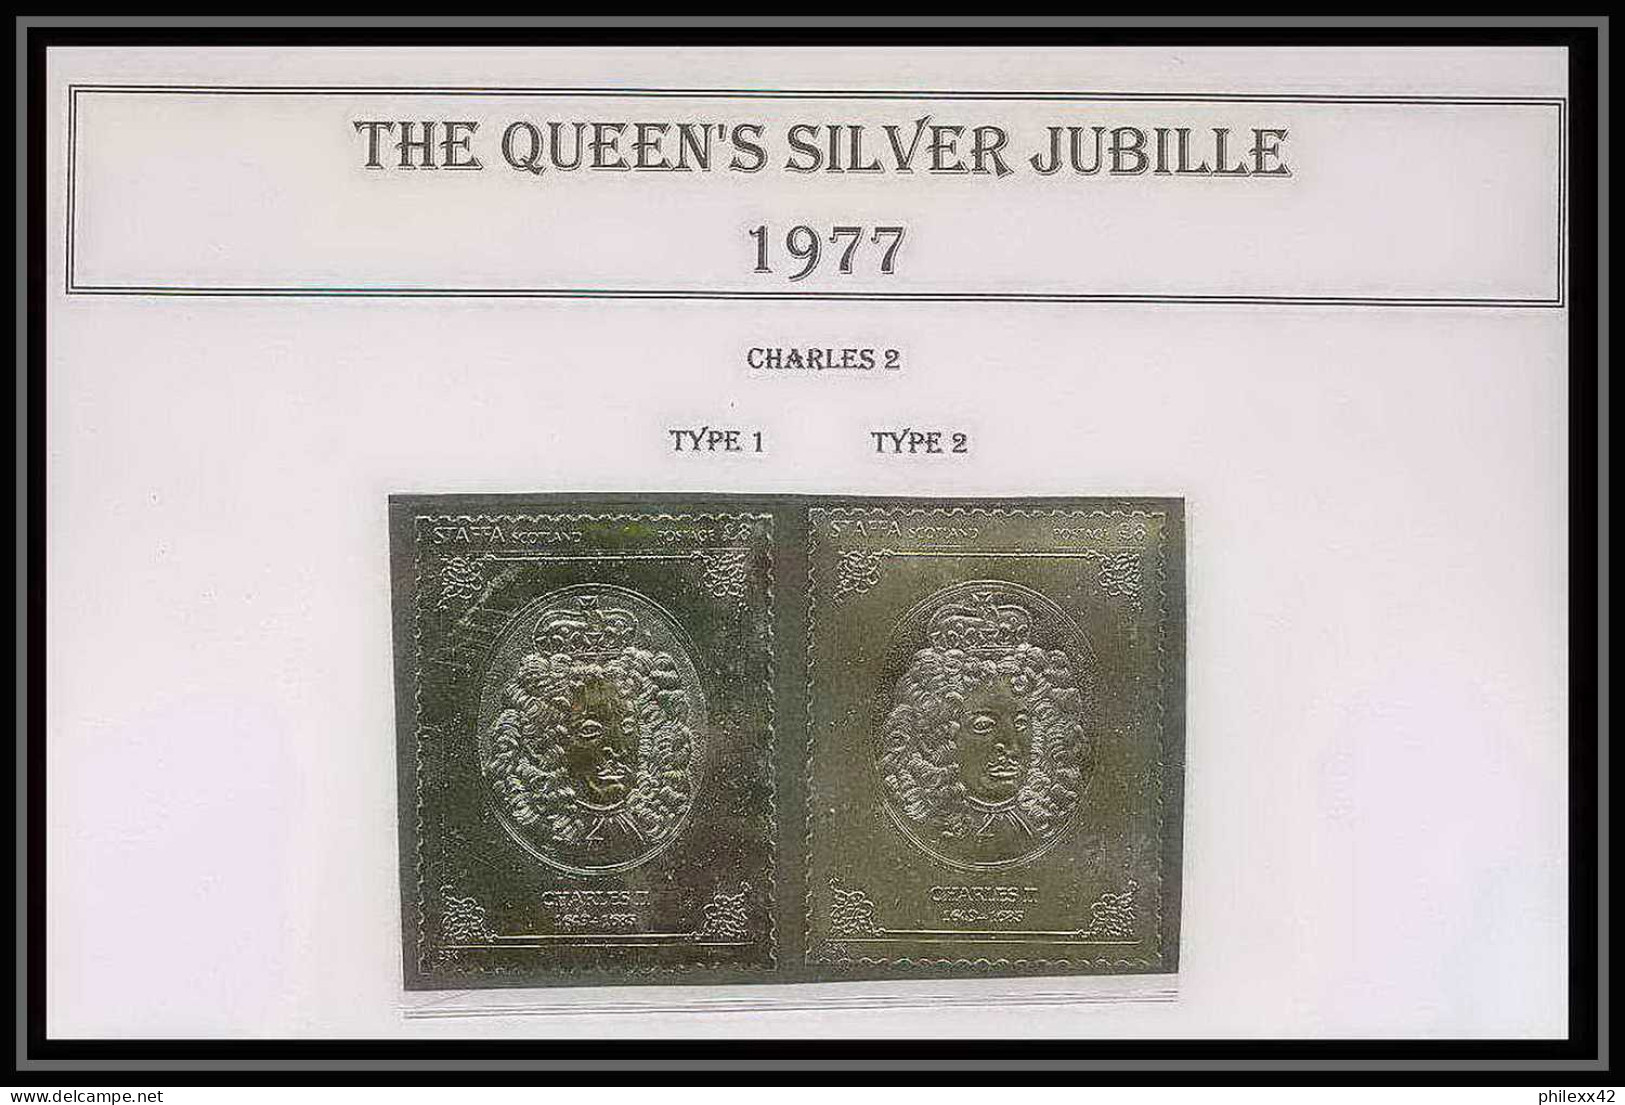 446a Staffa Scotland The Queen's Silver Jubilee 1977 OR Gold Stamps Monarchy United Kingdom Charles 2 Type 1&2 ** - Ortsausgaben